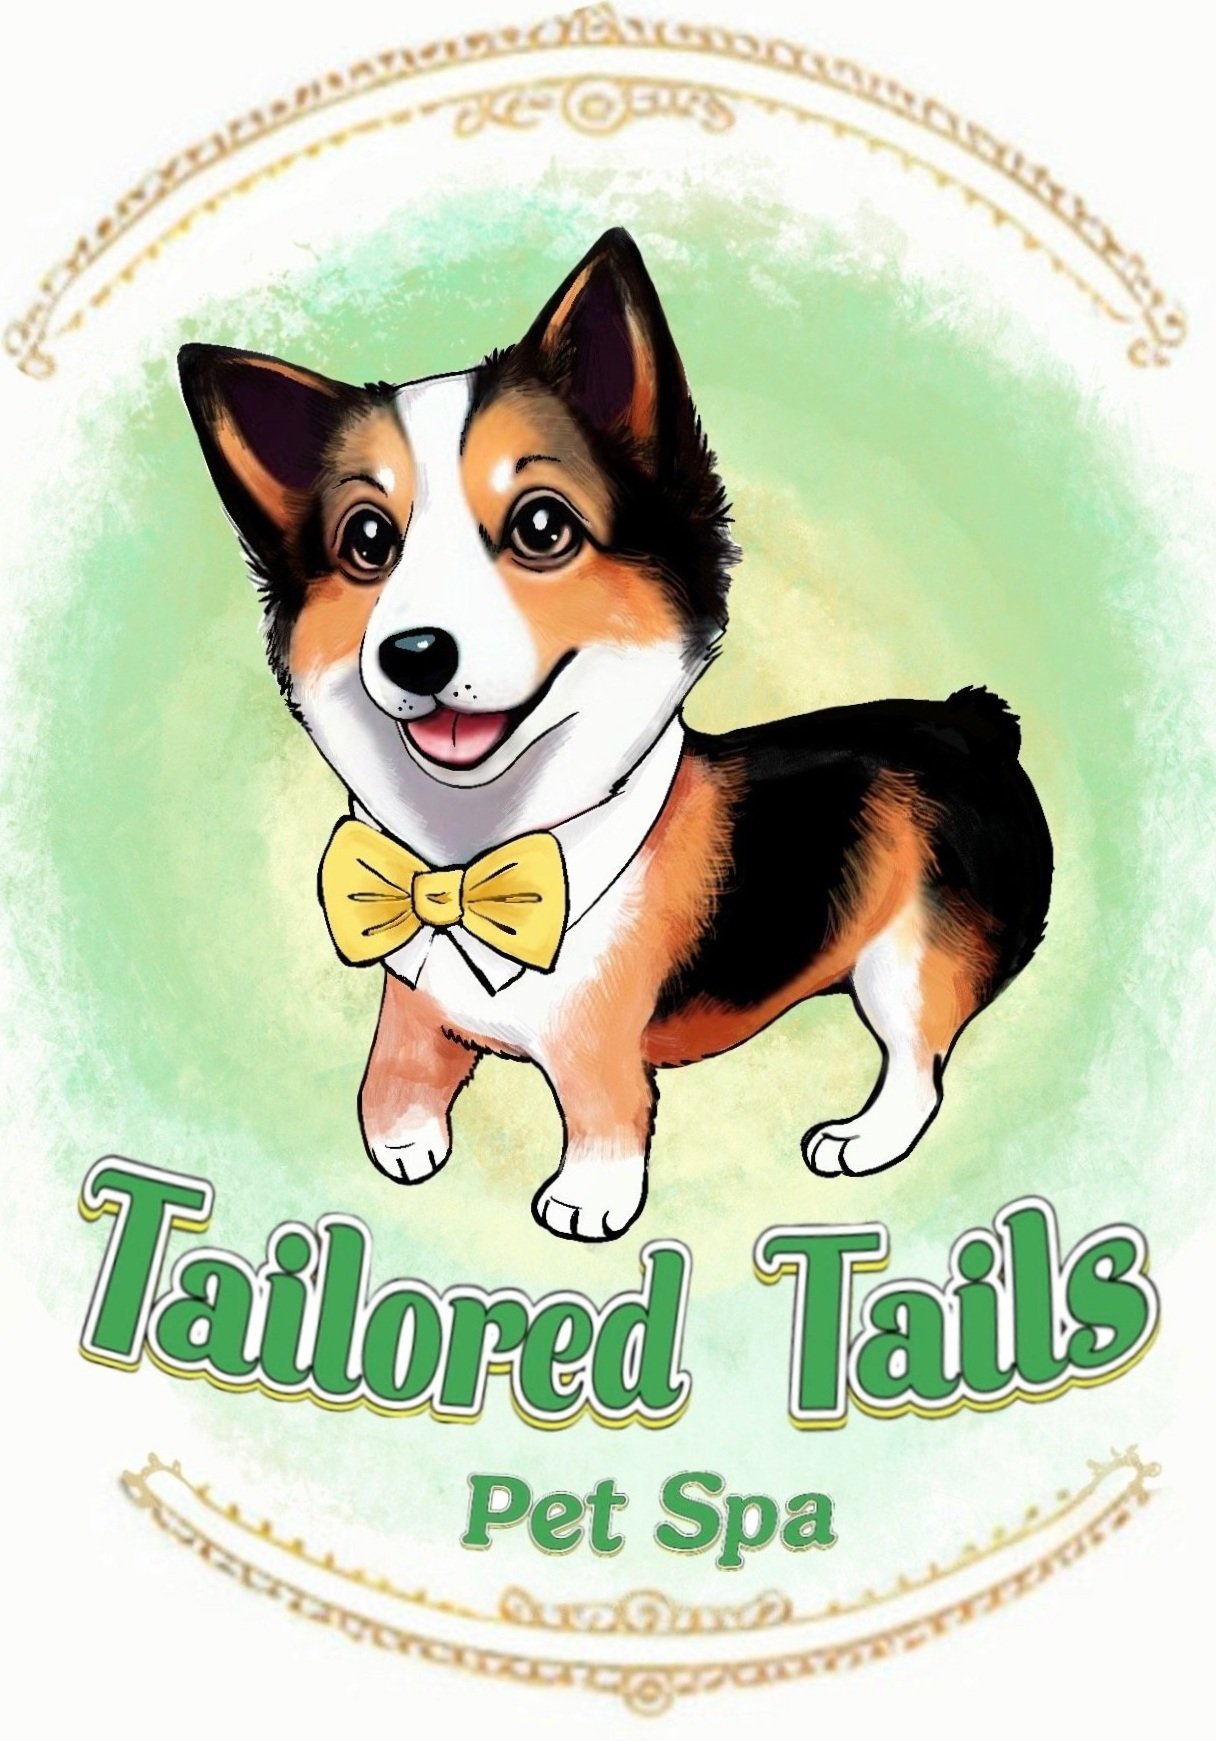 Tailored Tails Luxury Pet Grooming Spa